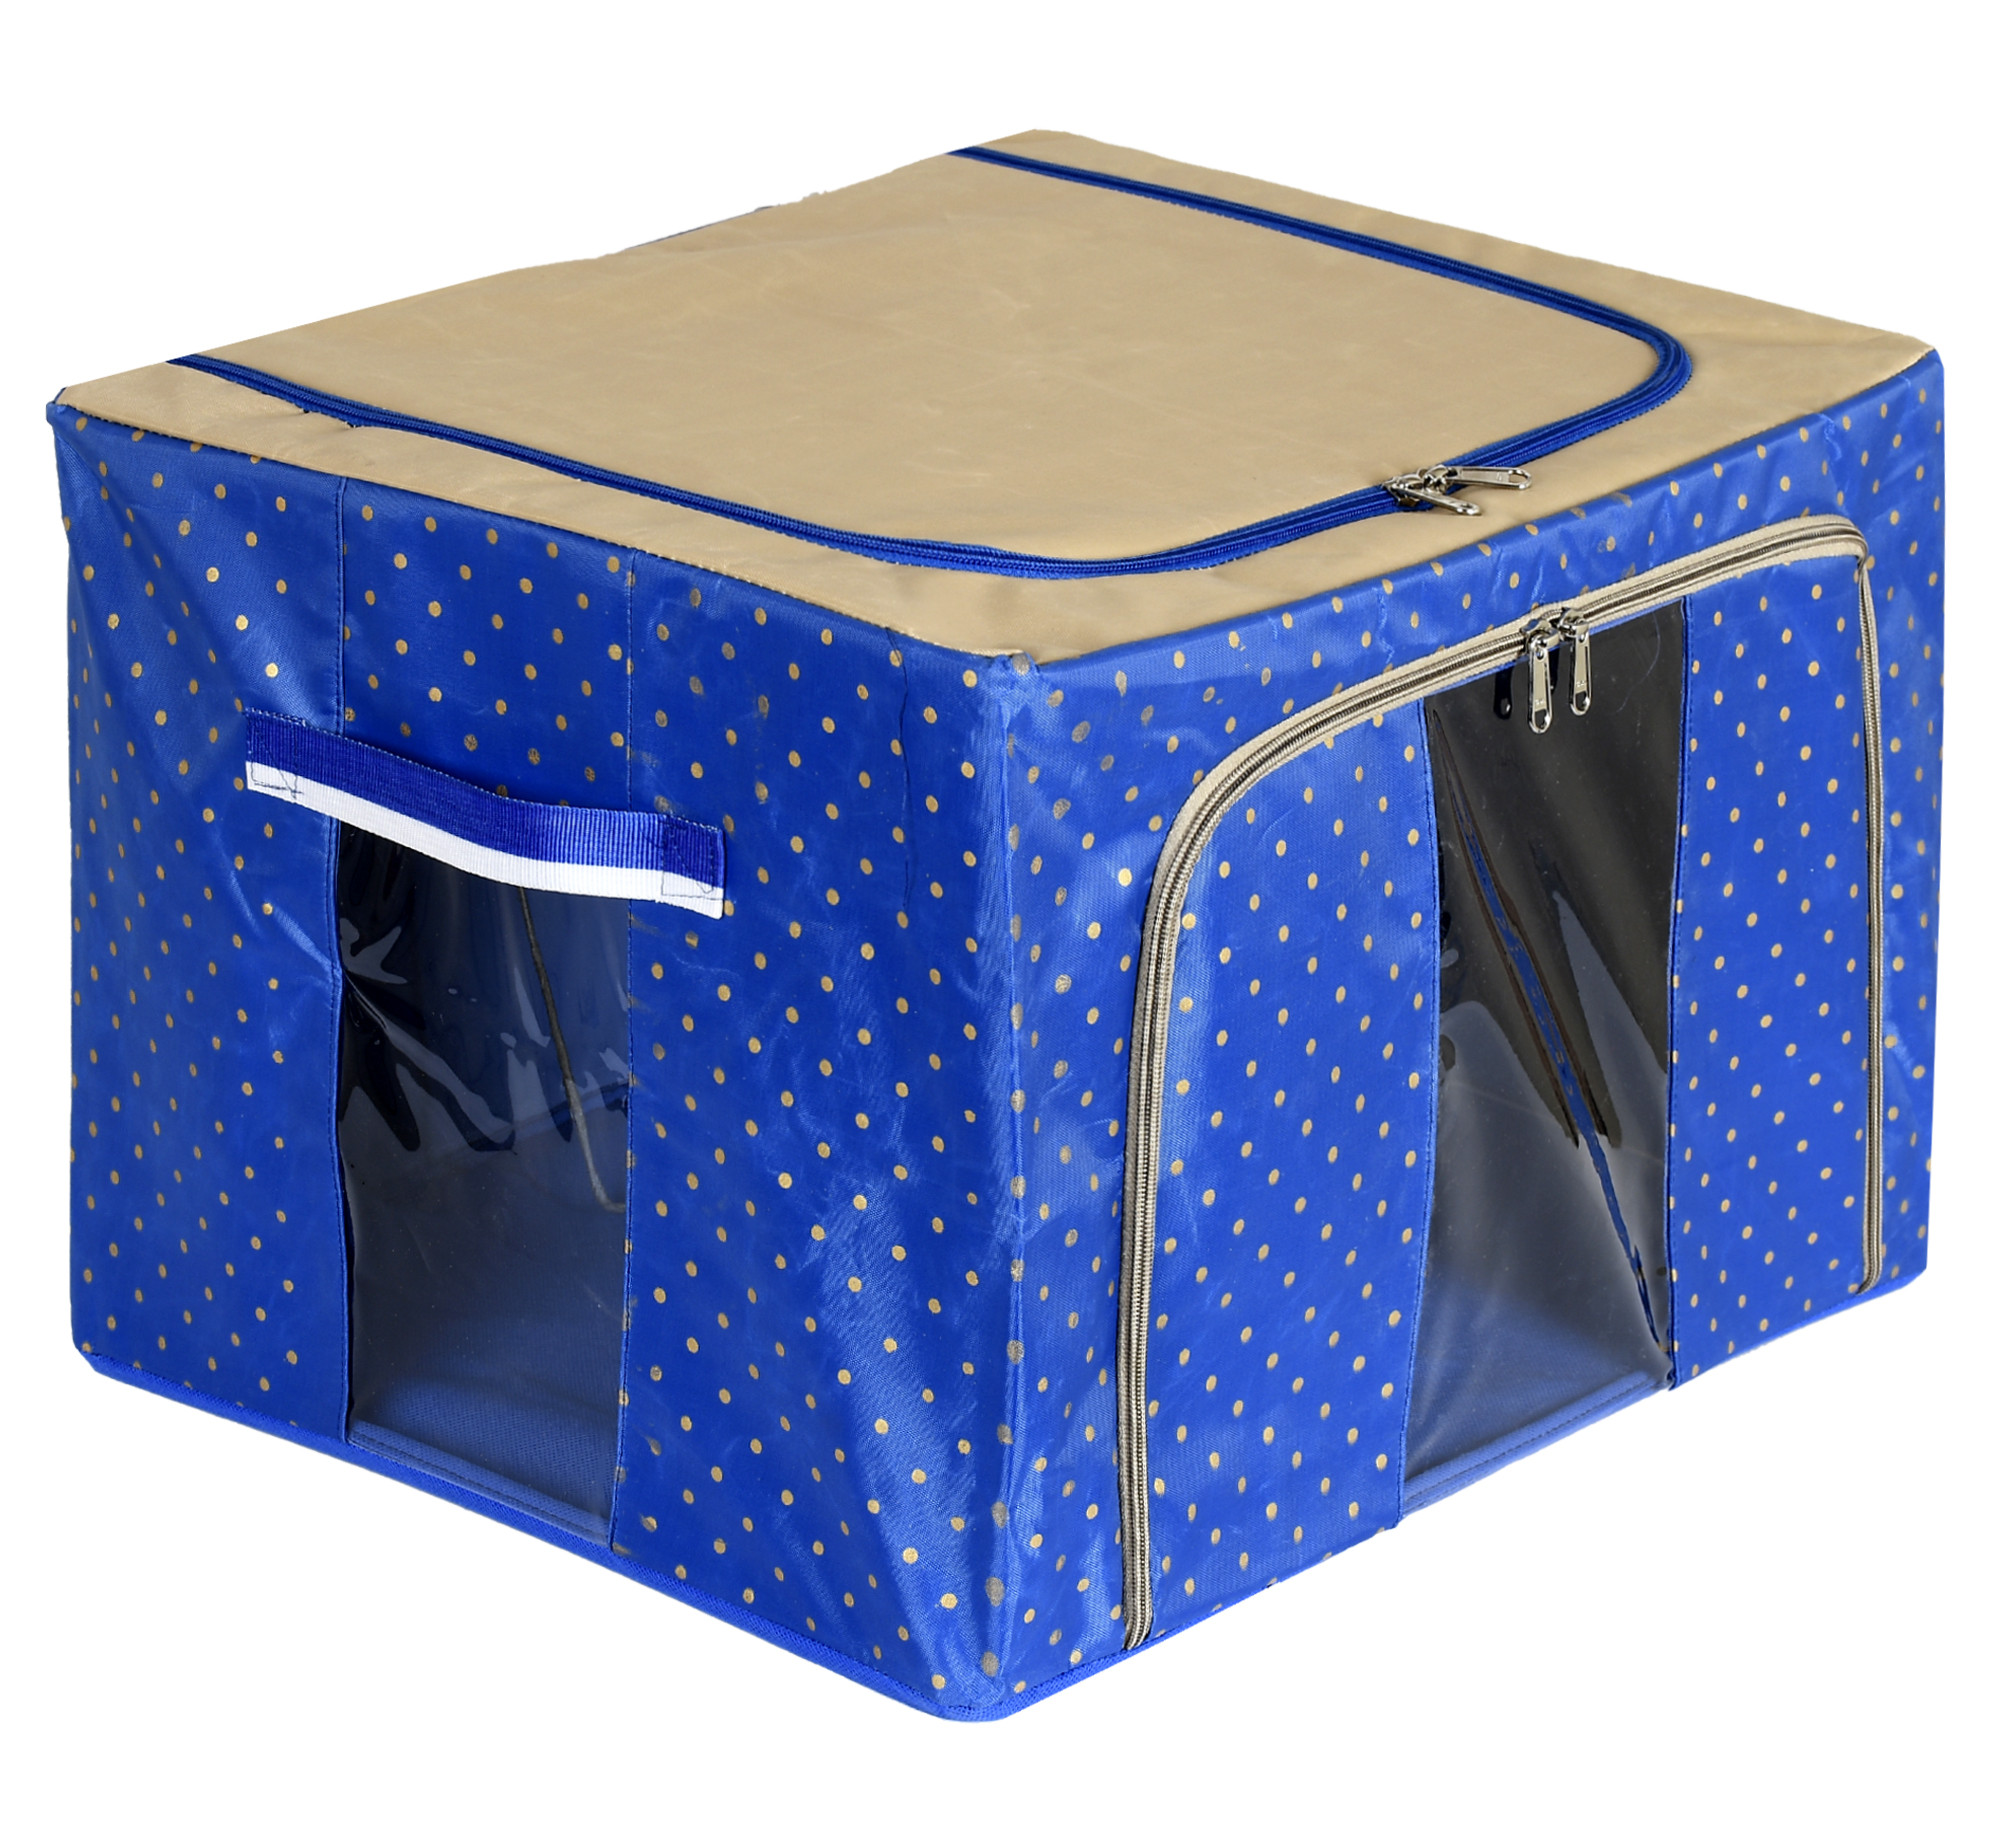 Kuber Industries Dot Printed Steel Frame Storage Box/Organizer For Clothing, Blankets, Bedding With Clear Window, 66Ltr. (Blue & Brown)-44KM0249